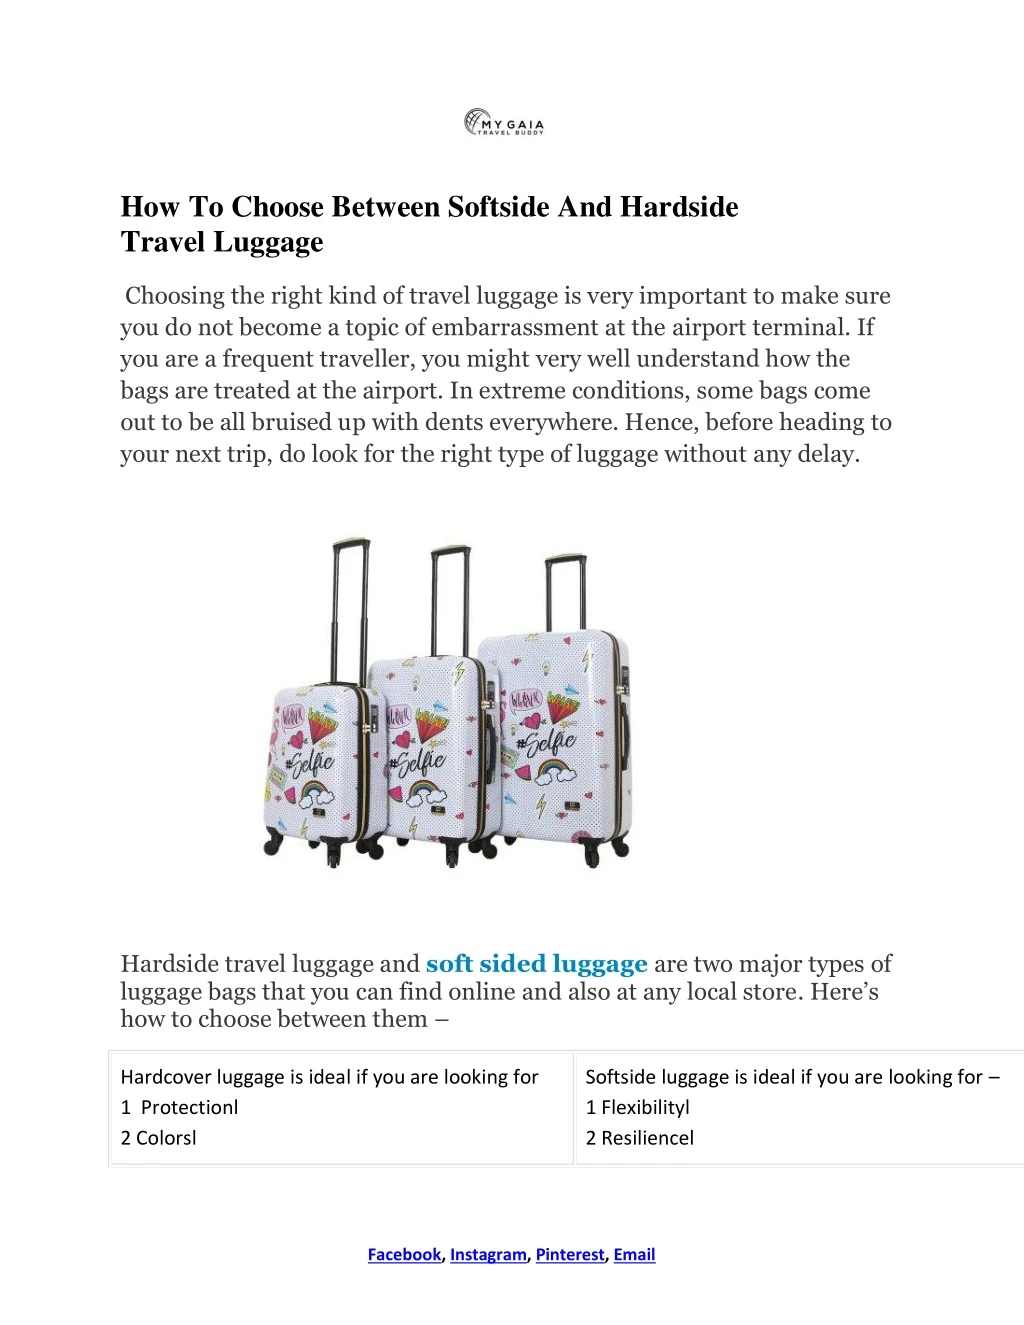 how to choose between softside and hardside